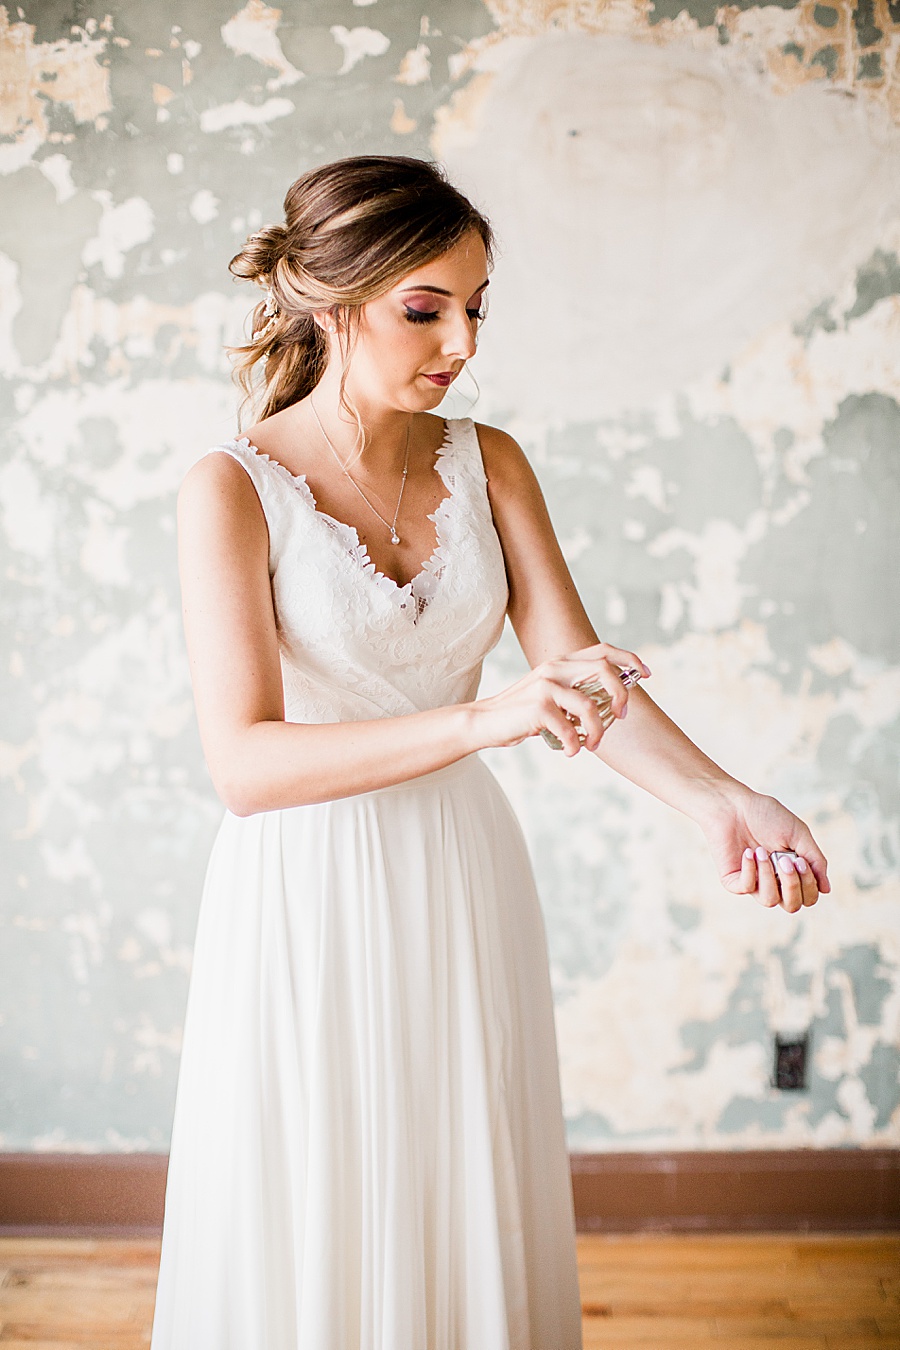 Spritzing perfume at this Wedding at The Standard by Knoxville Wedding Photographer, Amanda May Photos.